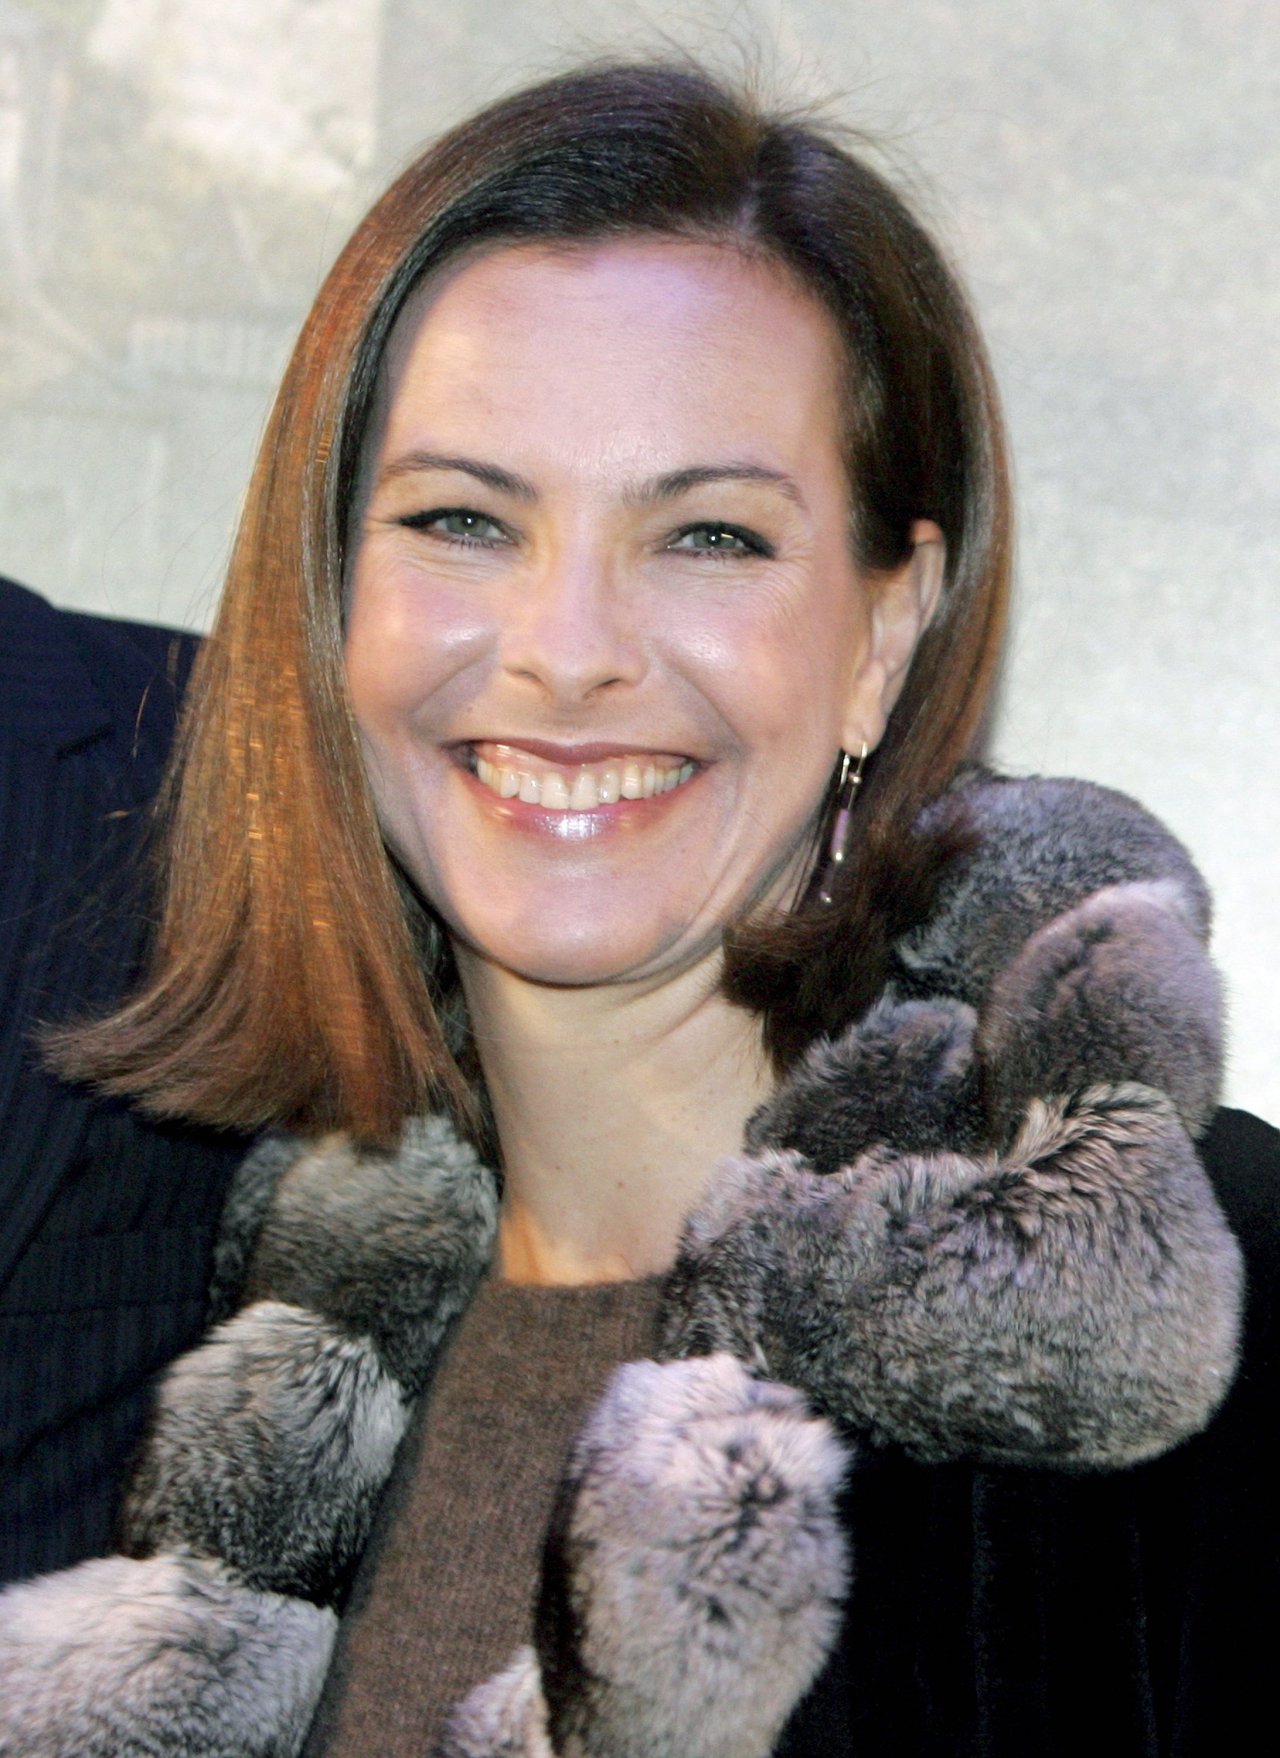 Carole Bouquet leaked wallpapers